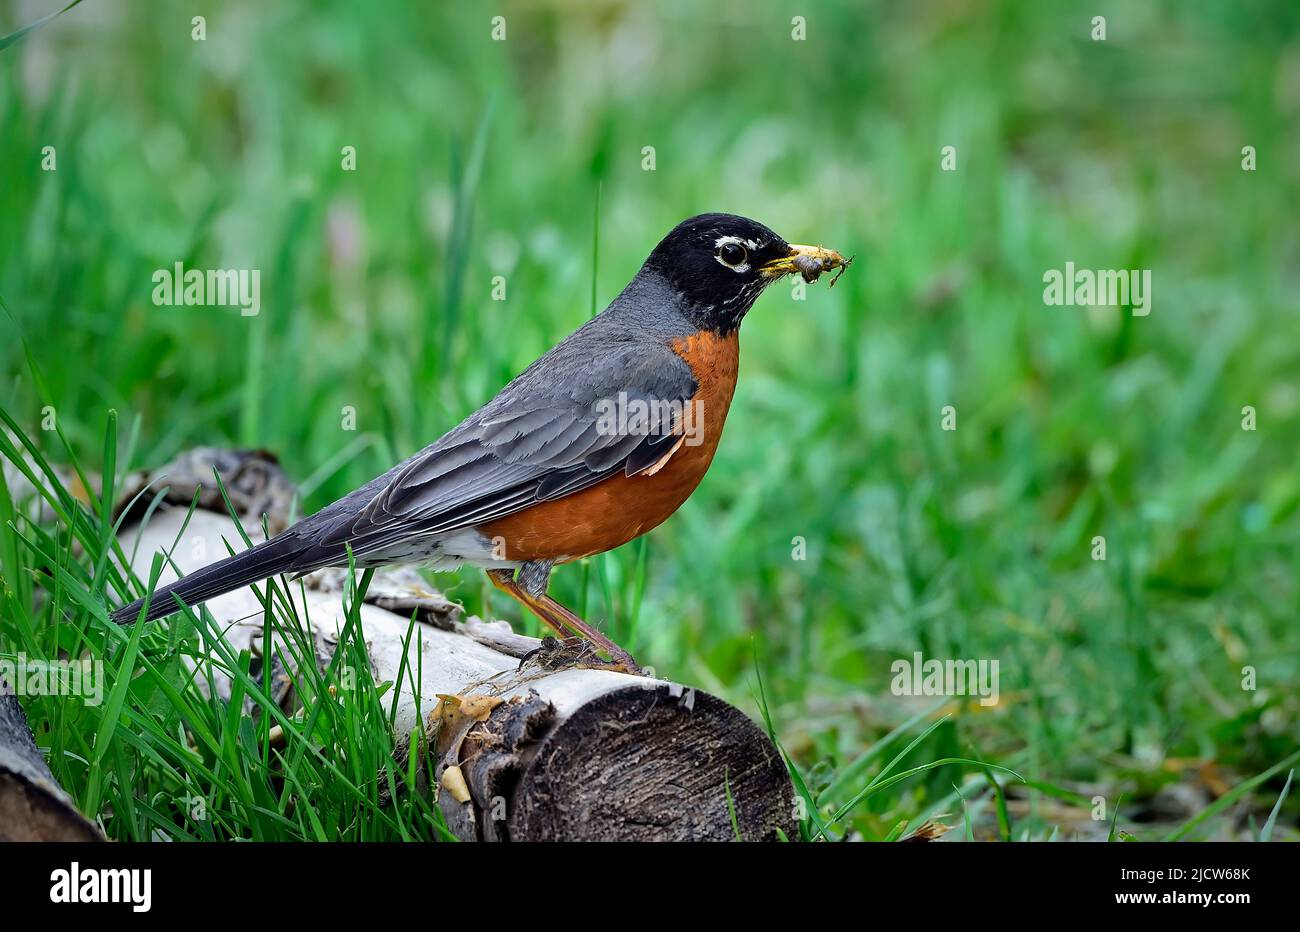 An adult American Robin with a bill full of caterpillars perched on a fallen log against a green grass background. Stock Photo